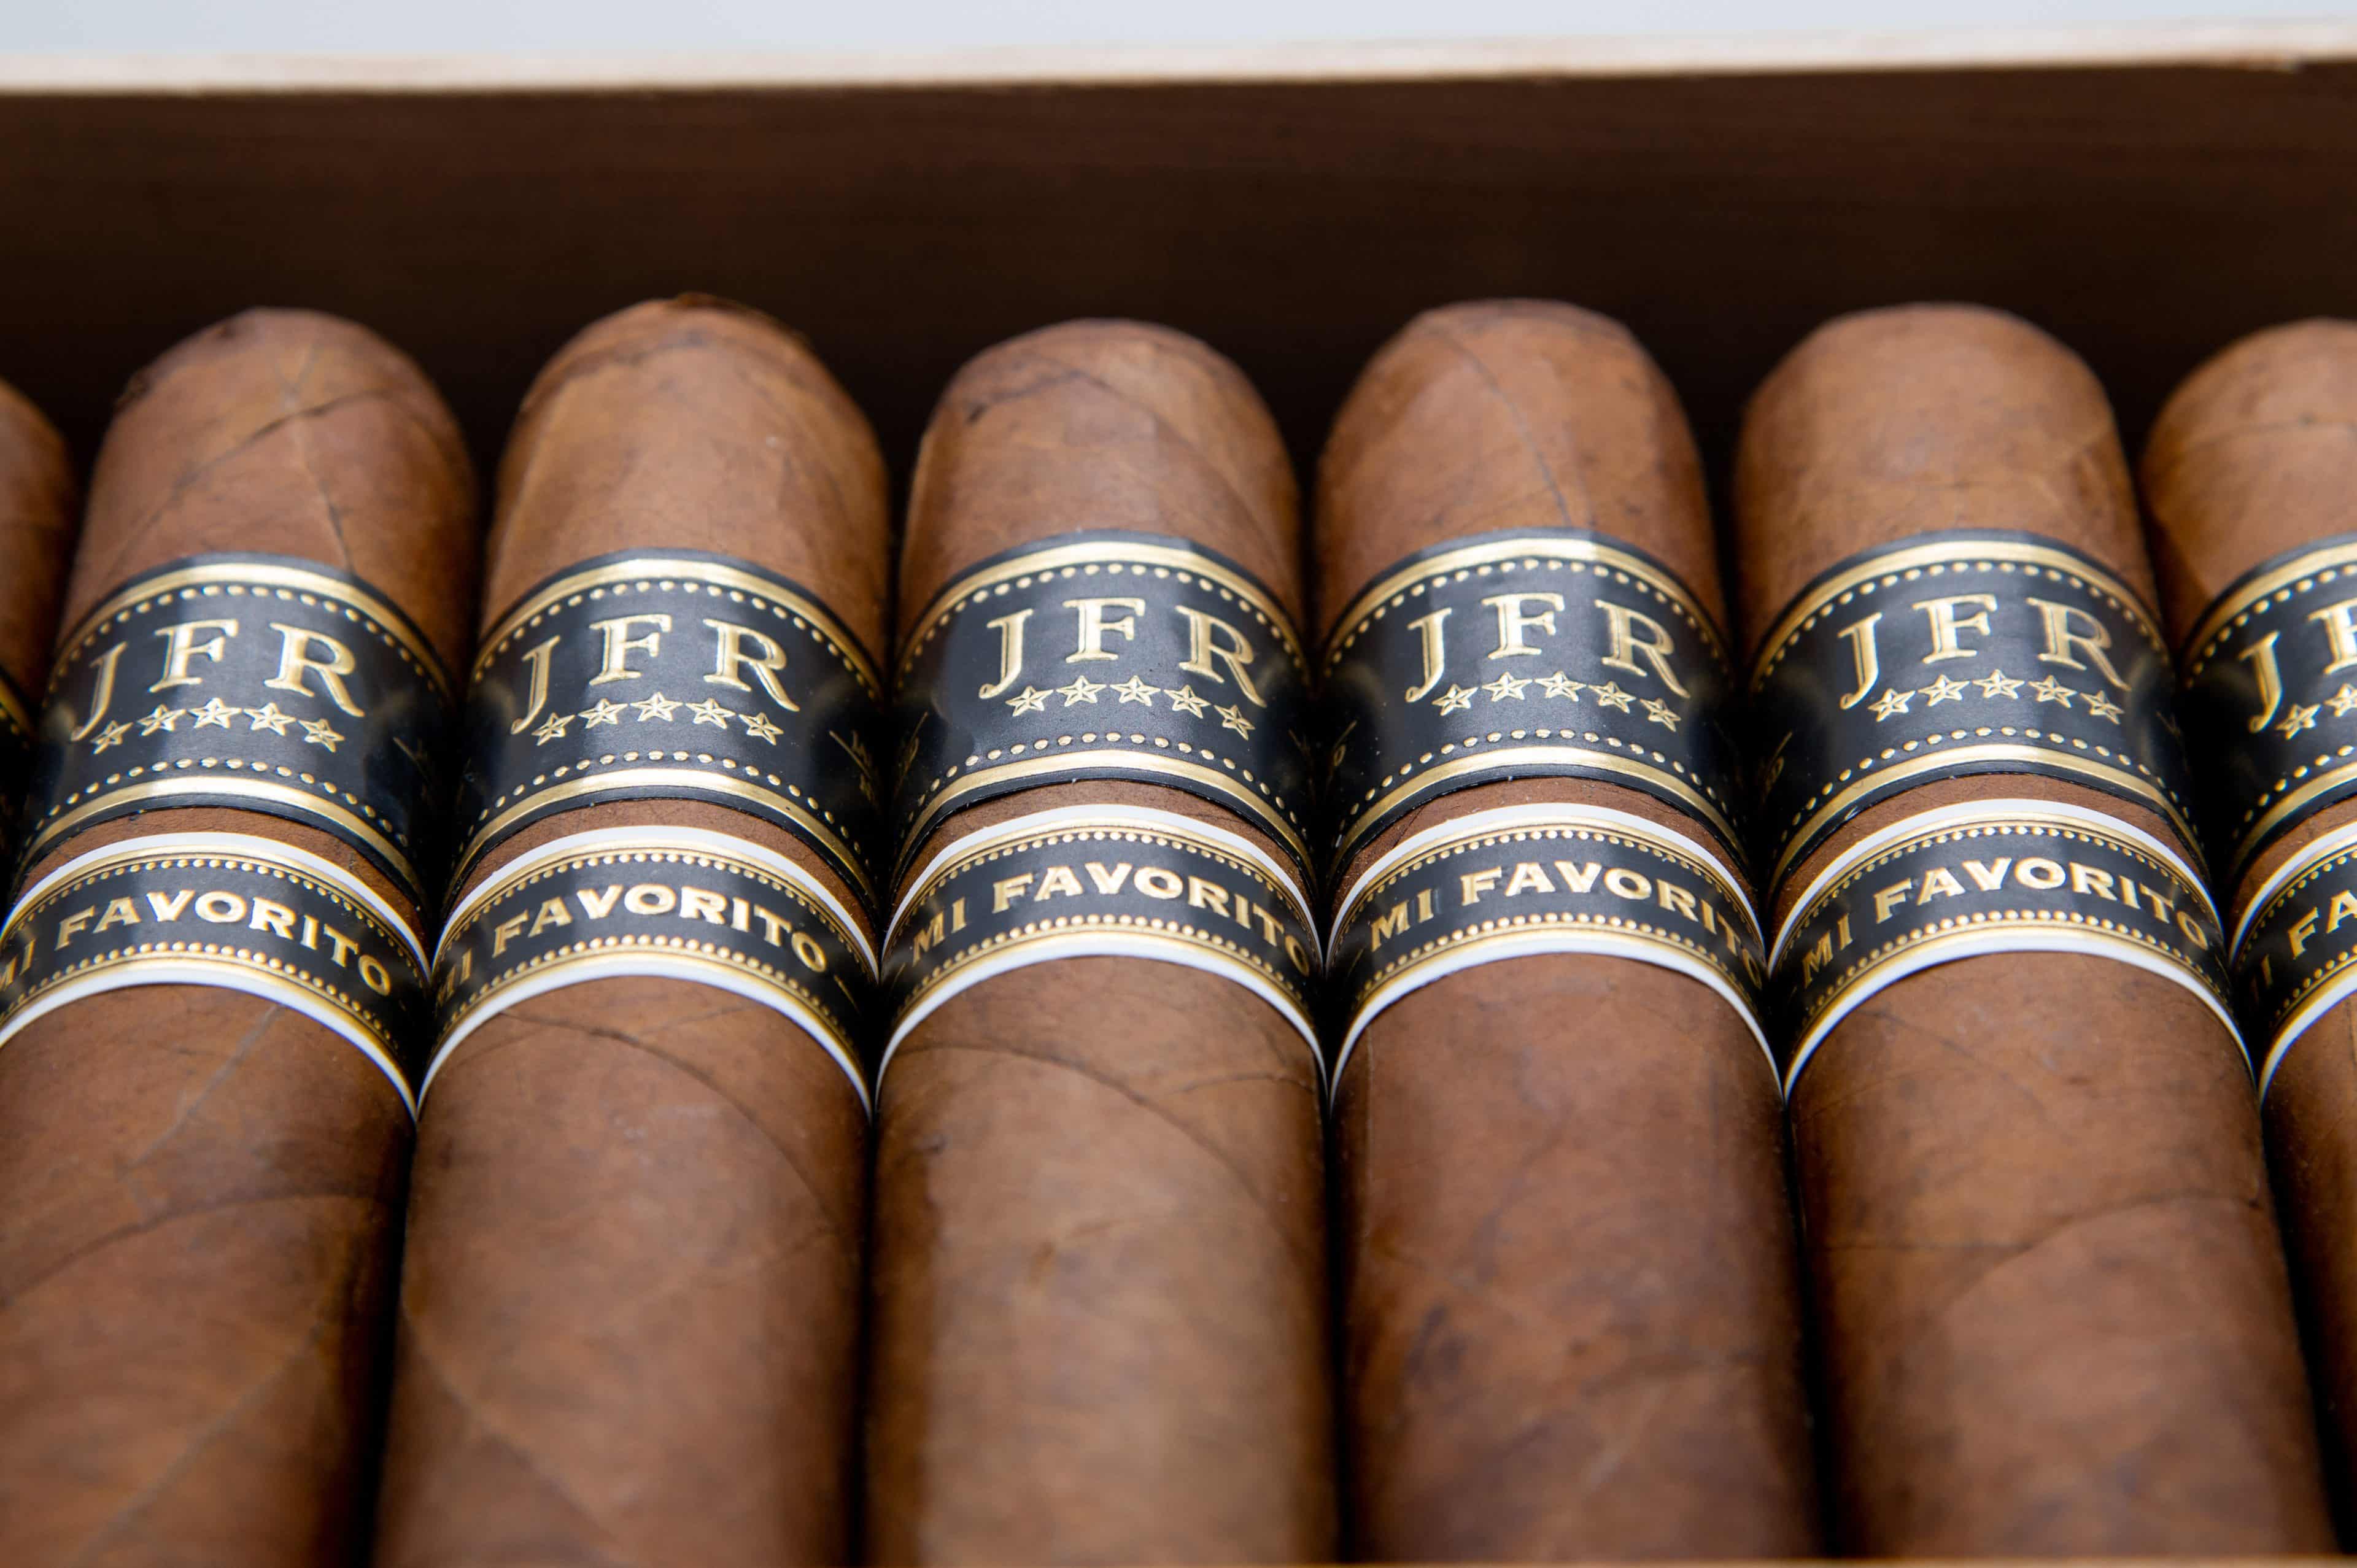 Aganorsa Adds 'Mi Favorito' Size to JFR Line - Cigar News